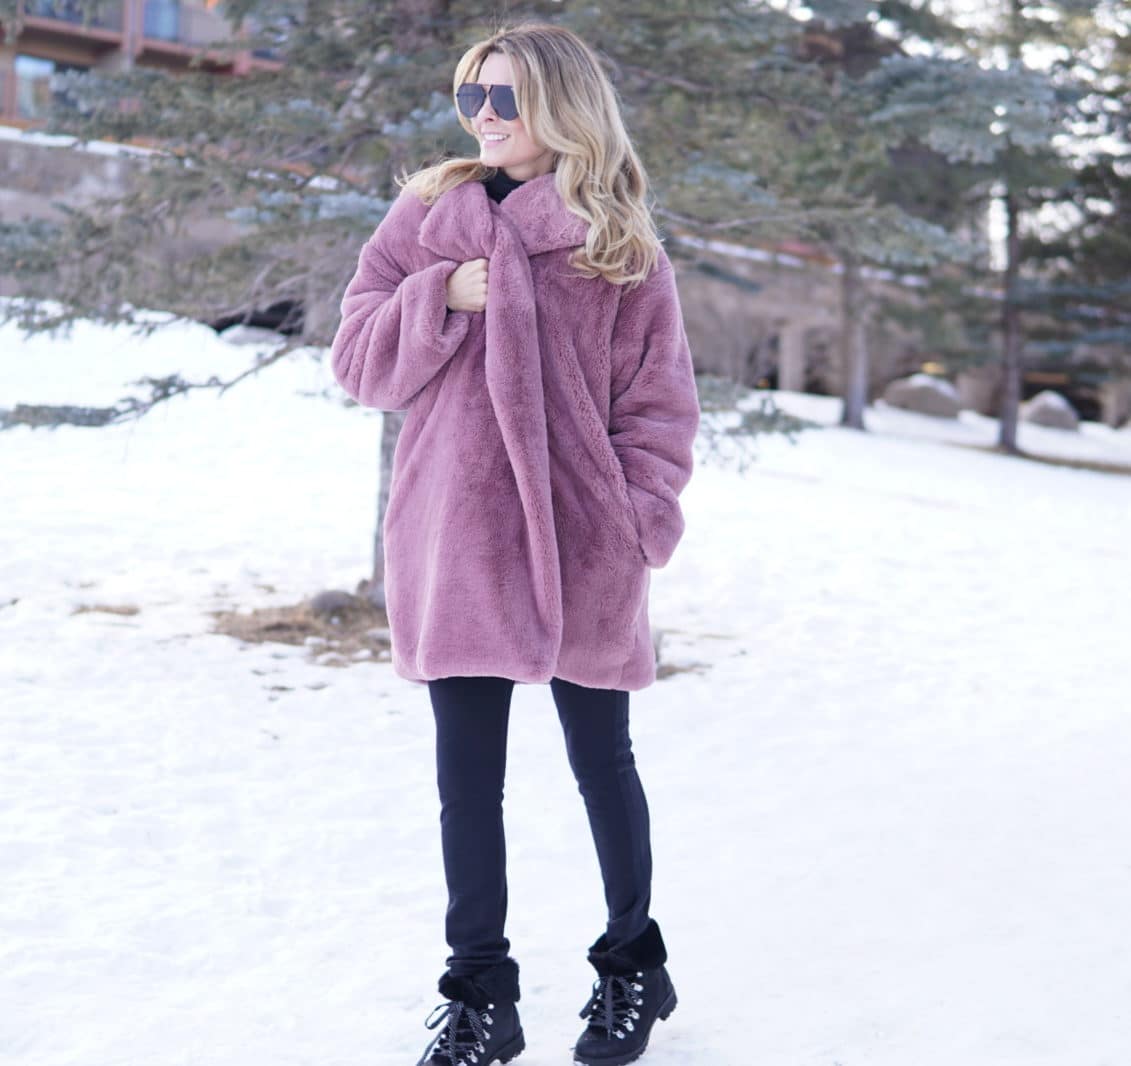 Lavender Furry Coat Trend - Her Fashioned Life